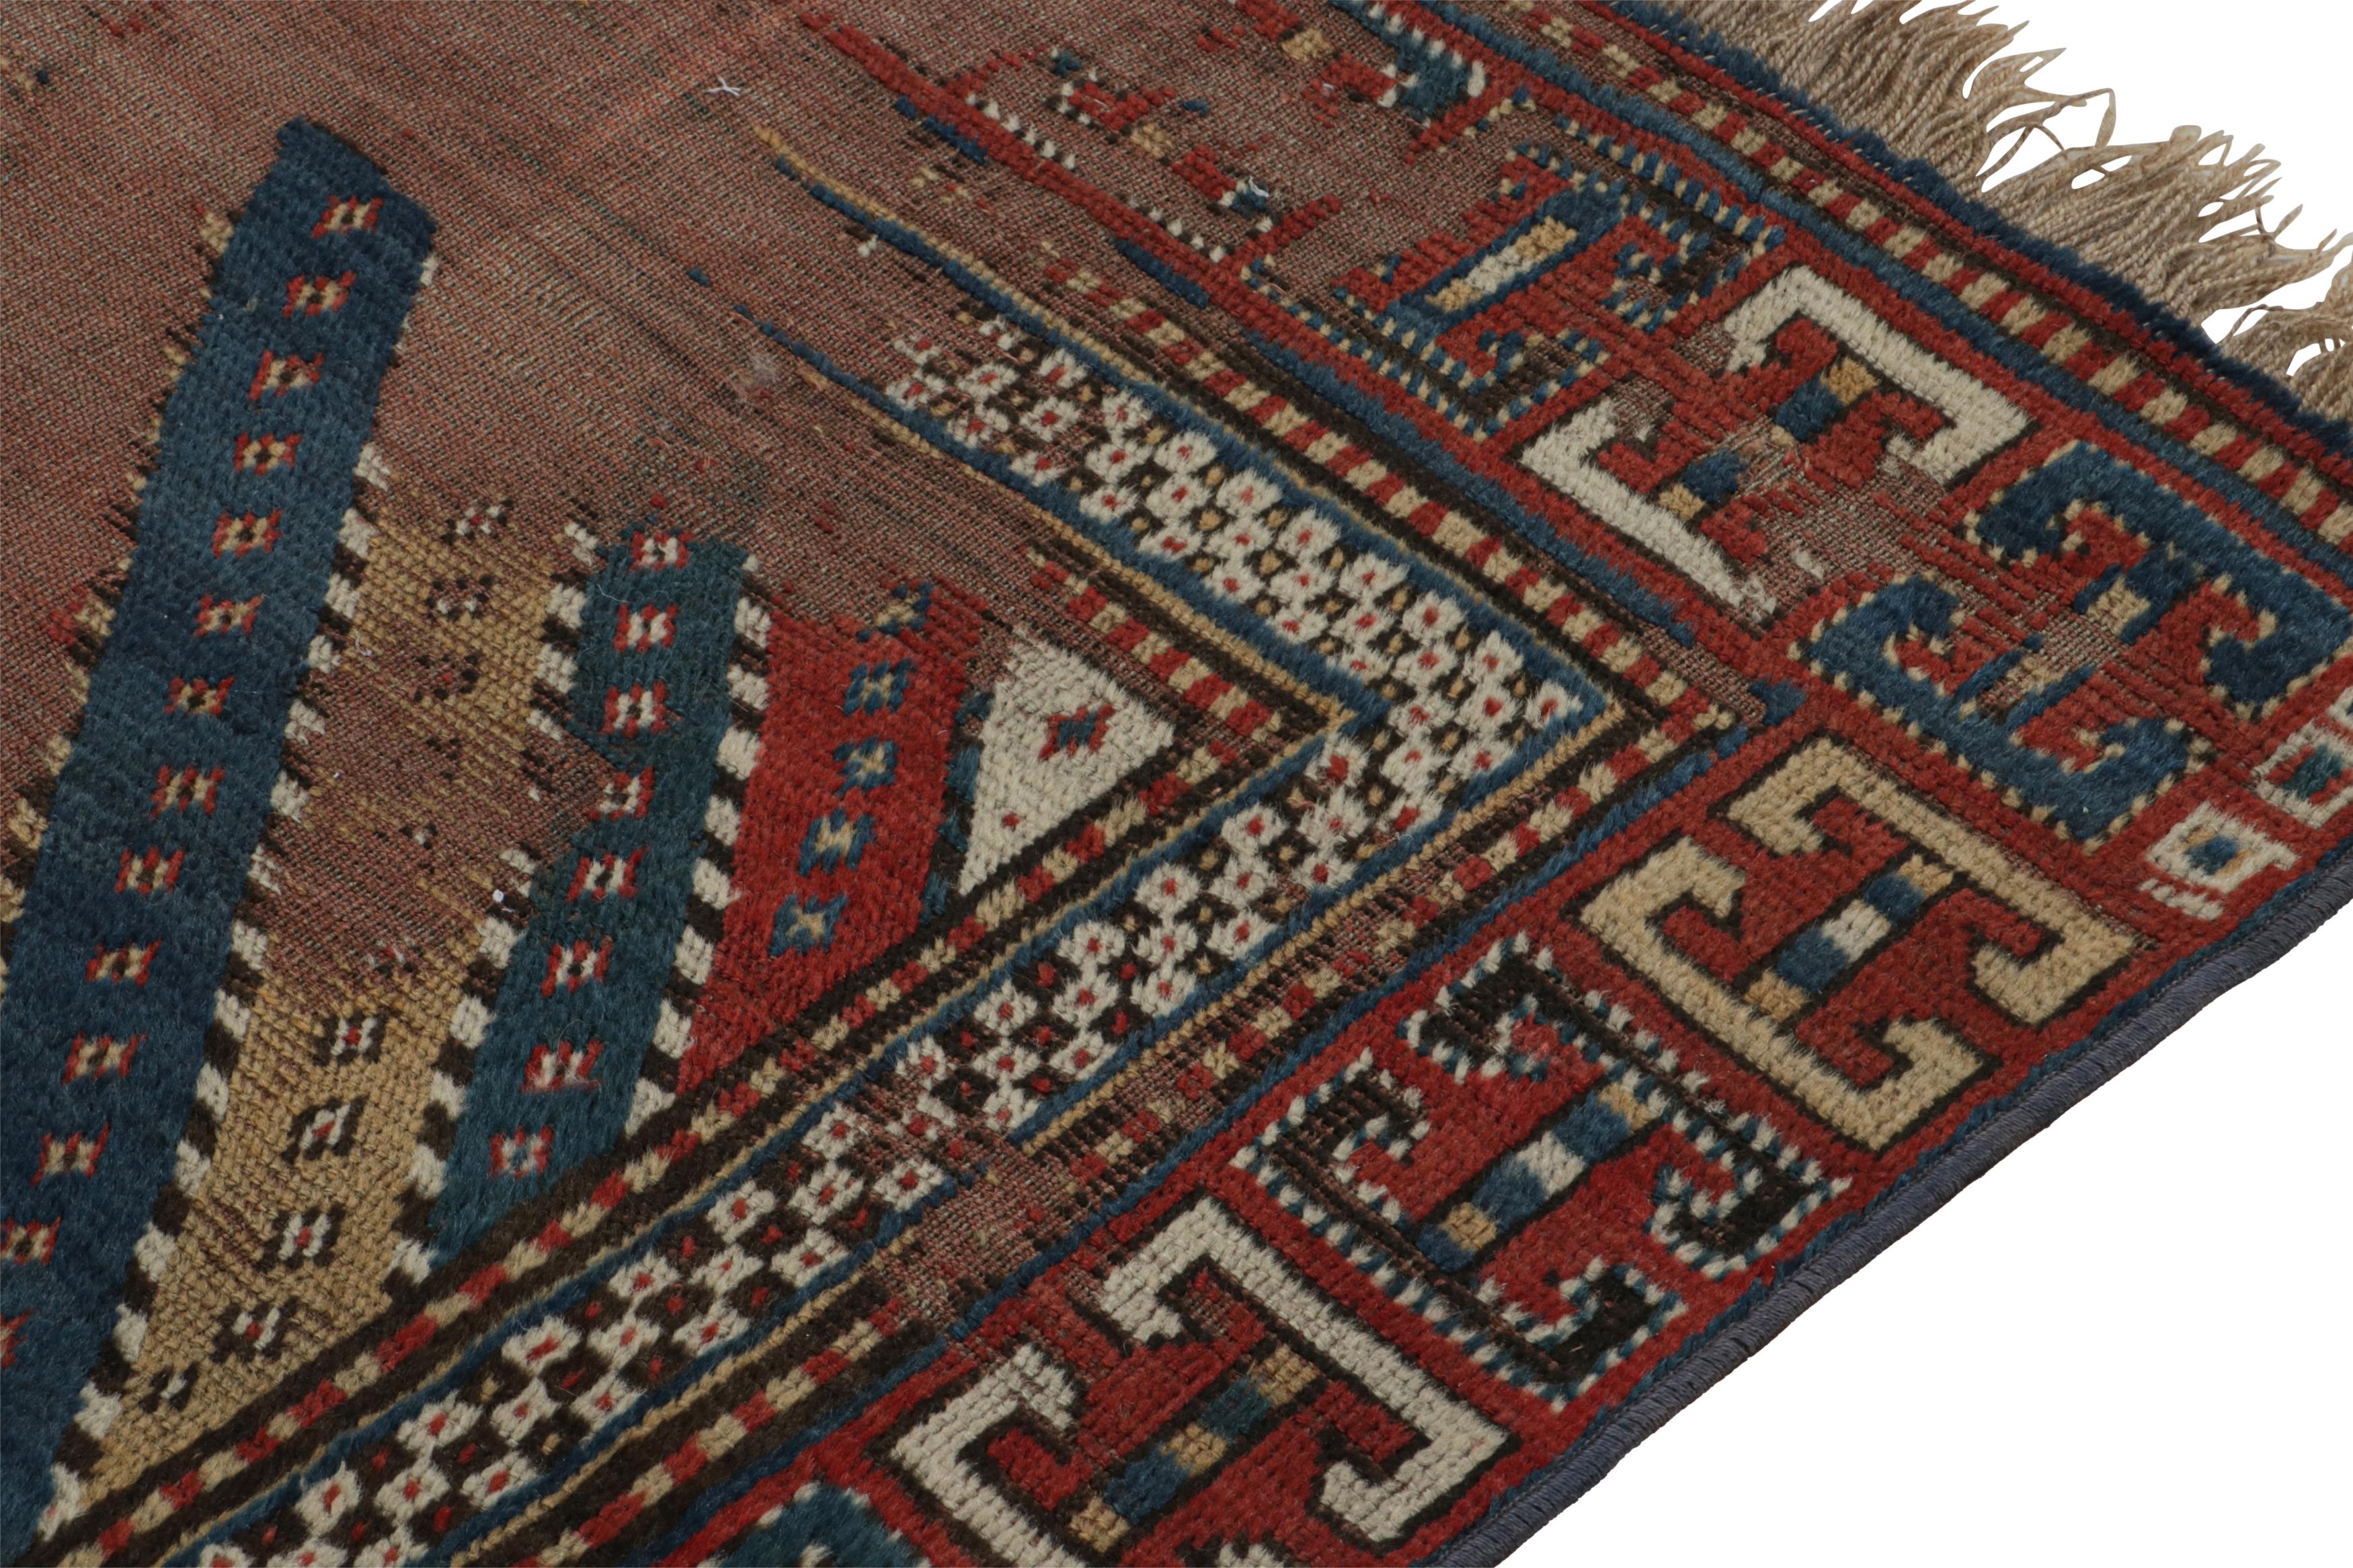 Hand-Knotted Antique Kazak Runner Rug with Red & Blue Geometric Patterns, from Rug & Kilim For Sale